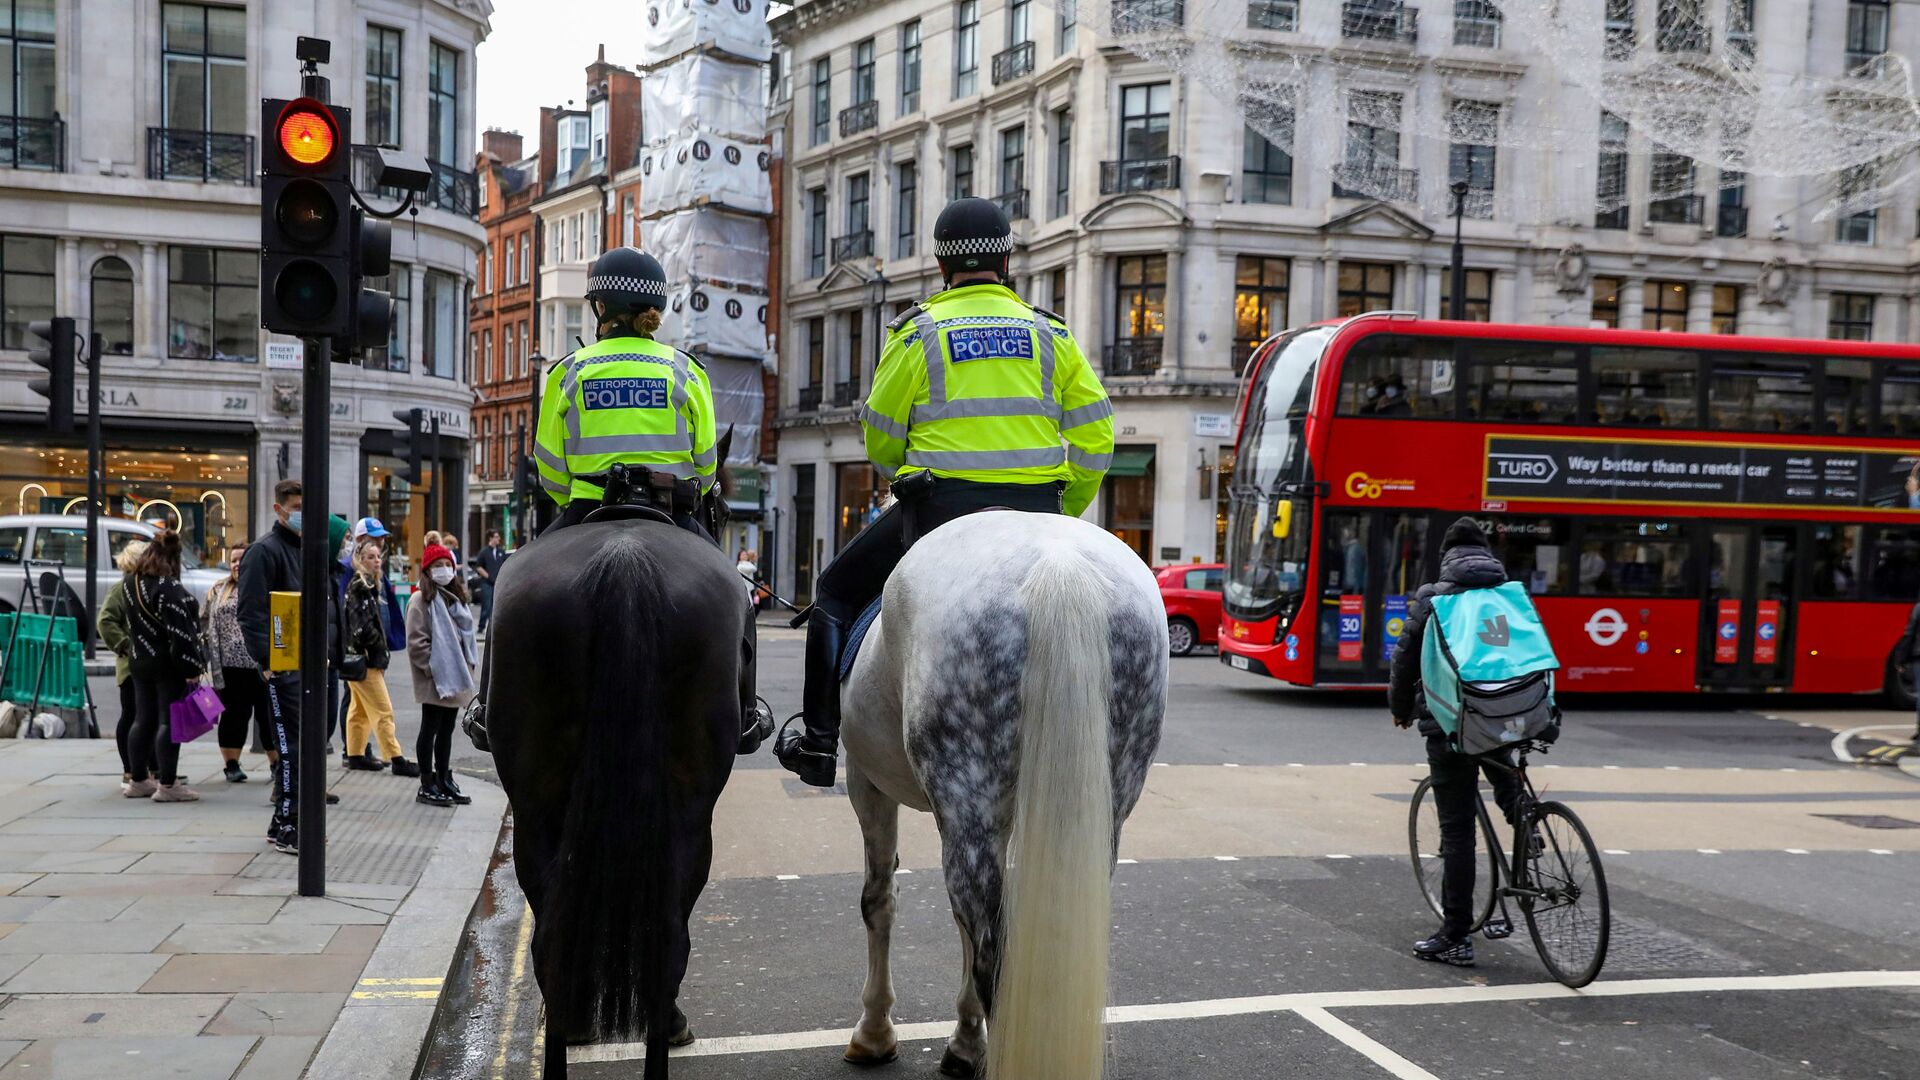 FILE PHOTO: Mounted police and a Deliveroo rider wait at a red light at Regent Street, one of London's main shopping streets, a day after a new lockdown was announced during the coronavirus disease (COVID-19) outbreak in London, Britain November 1, 2020 - Sputnik International, 1920, 04.10.2021